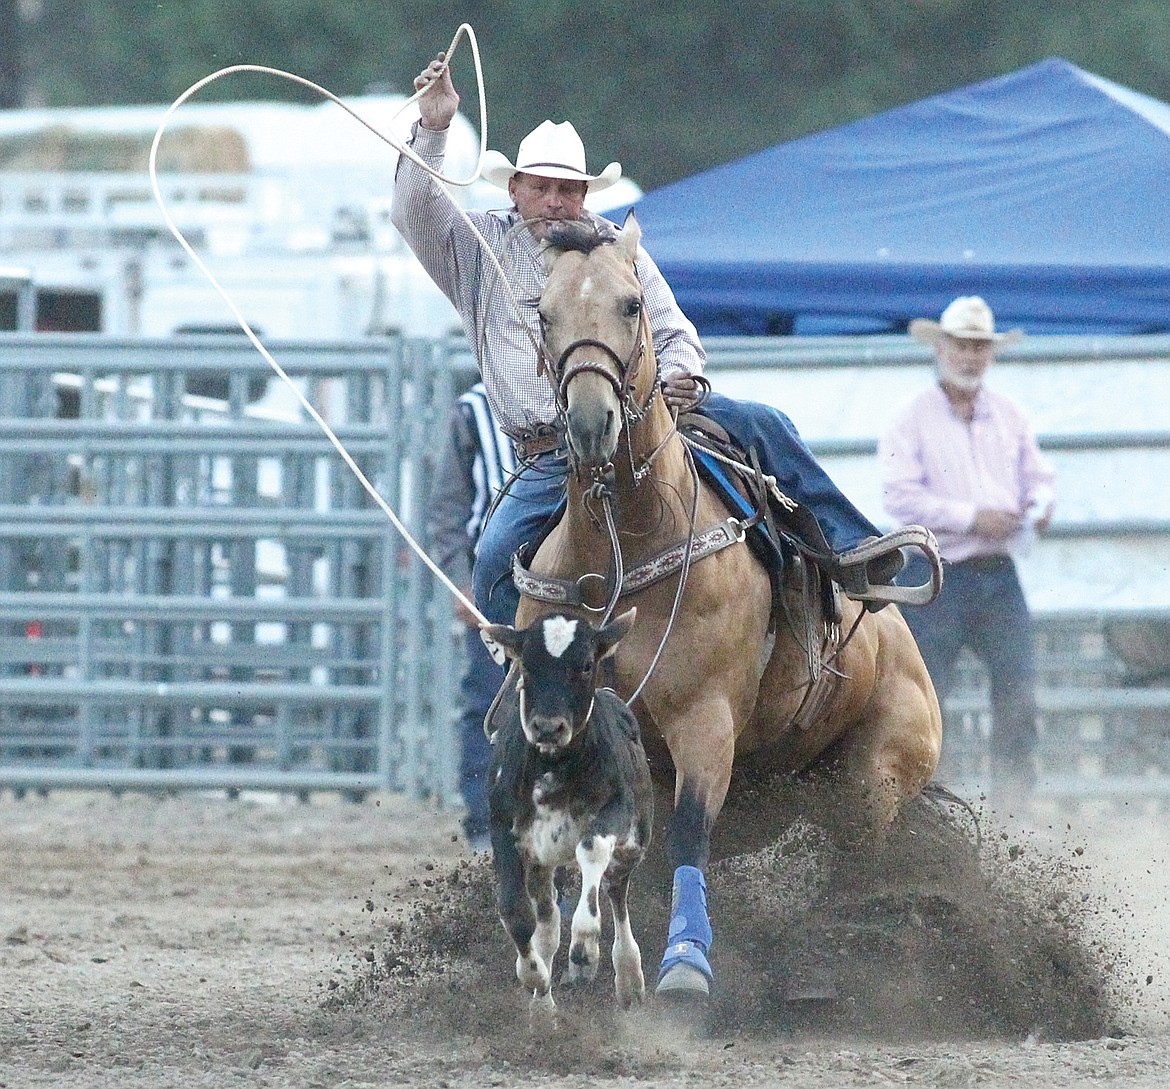 Cut Bank's Chad Johnson with a time of 15.5 in the tie down roping Friday evening at the Kootenai River Stampede. (Paul Sievers/The Western News)